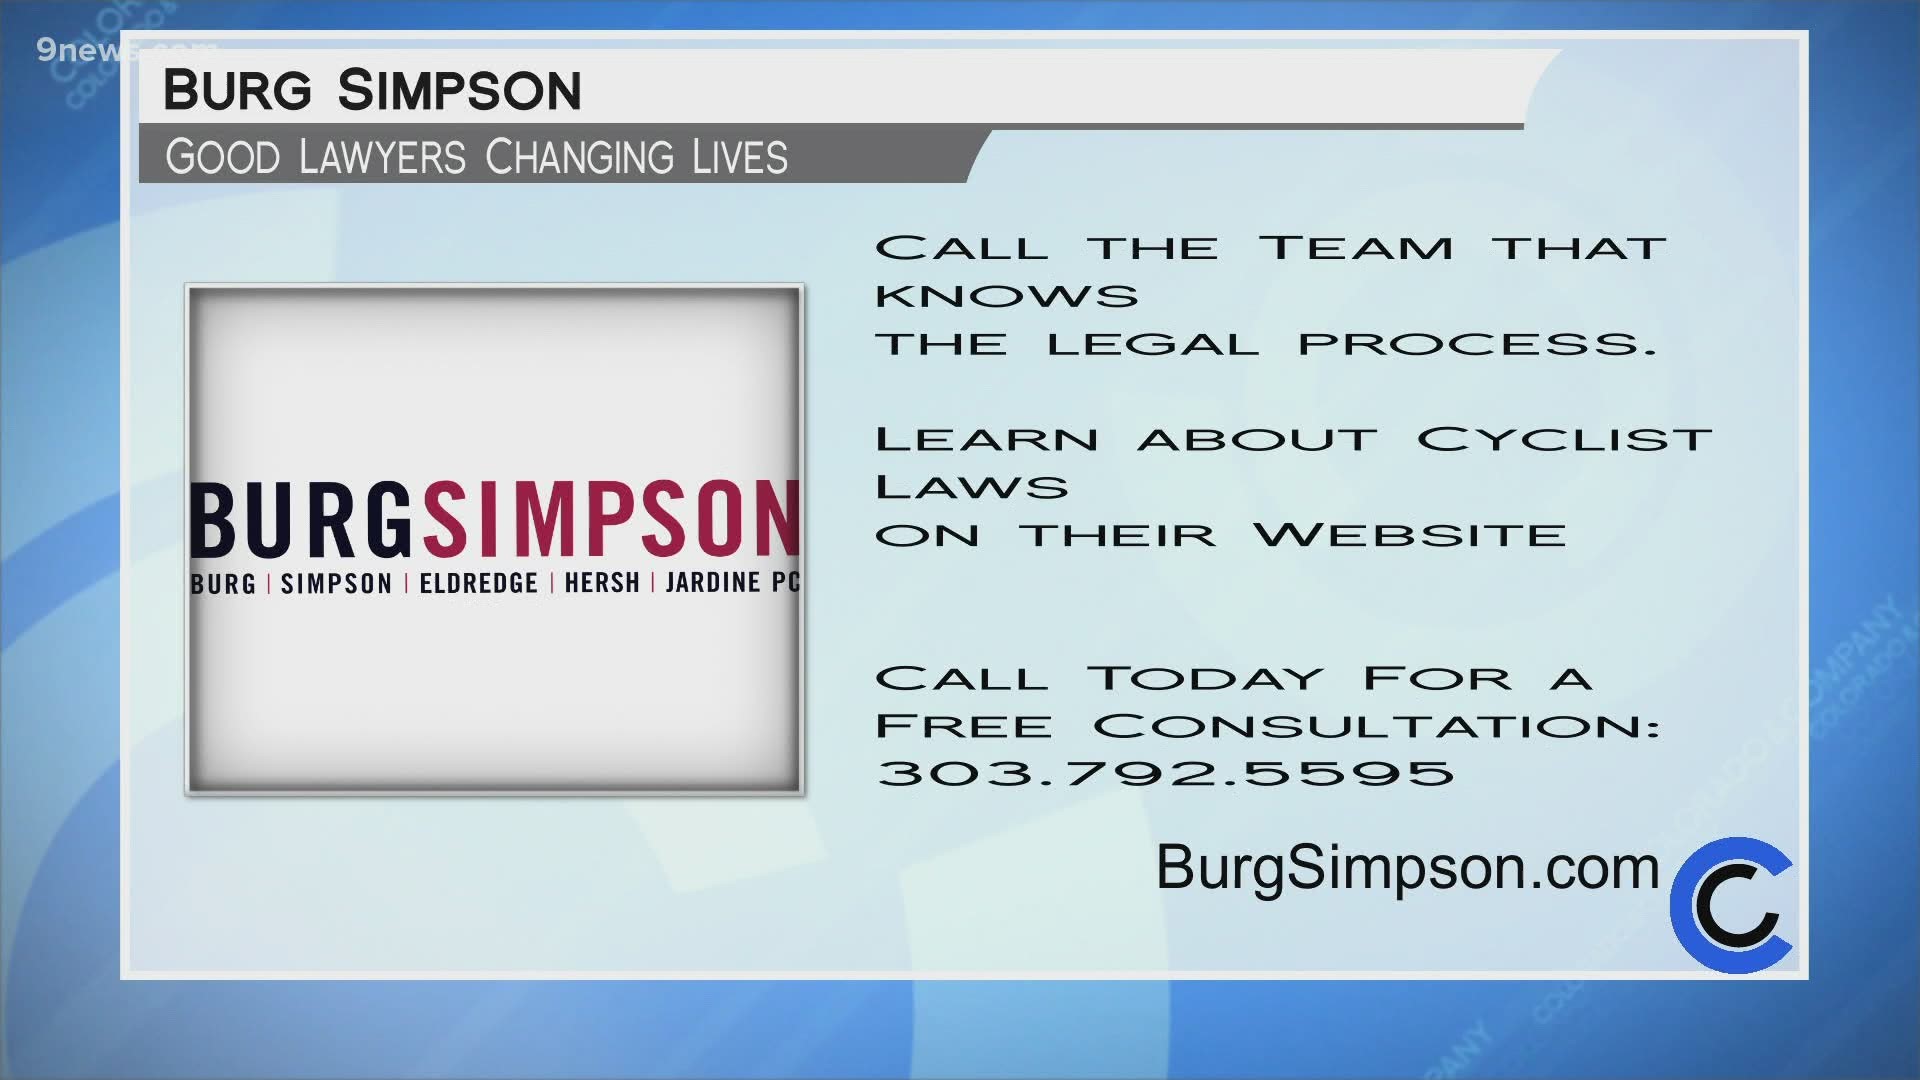 The team at Burg Simpson Eldredge Hersh and Jardine can help you navigate your legal options. Learn more at BurgSimpson.com or call 303.792.5595.